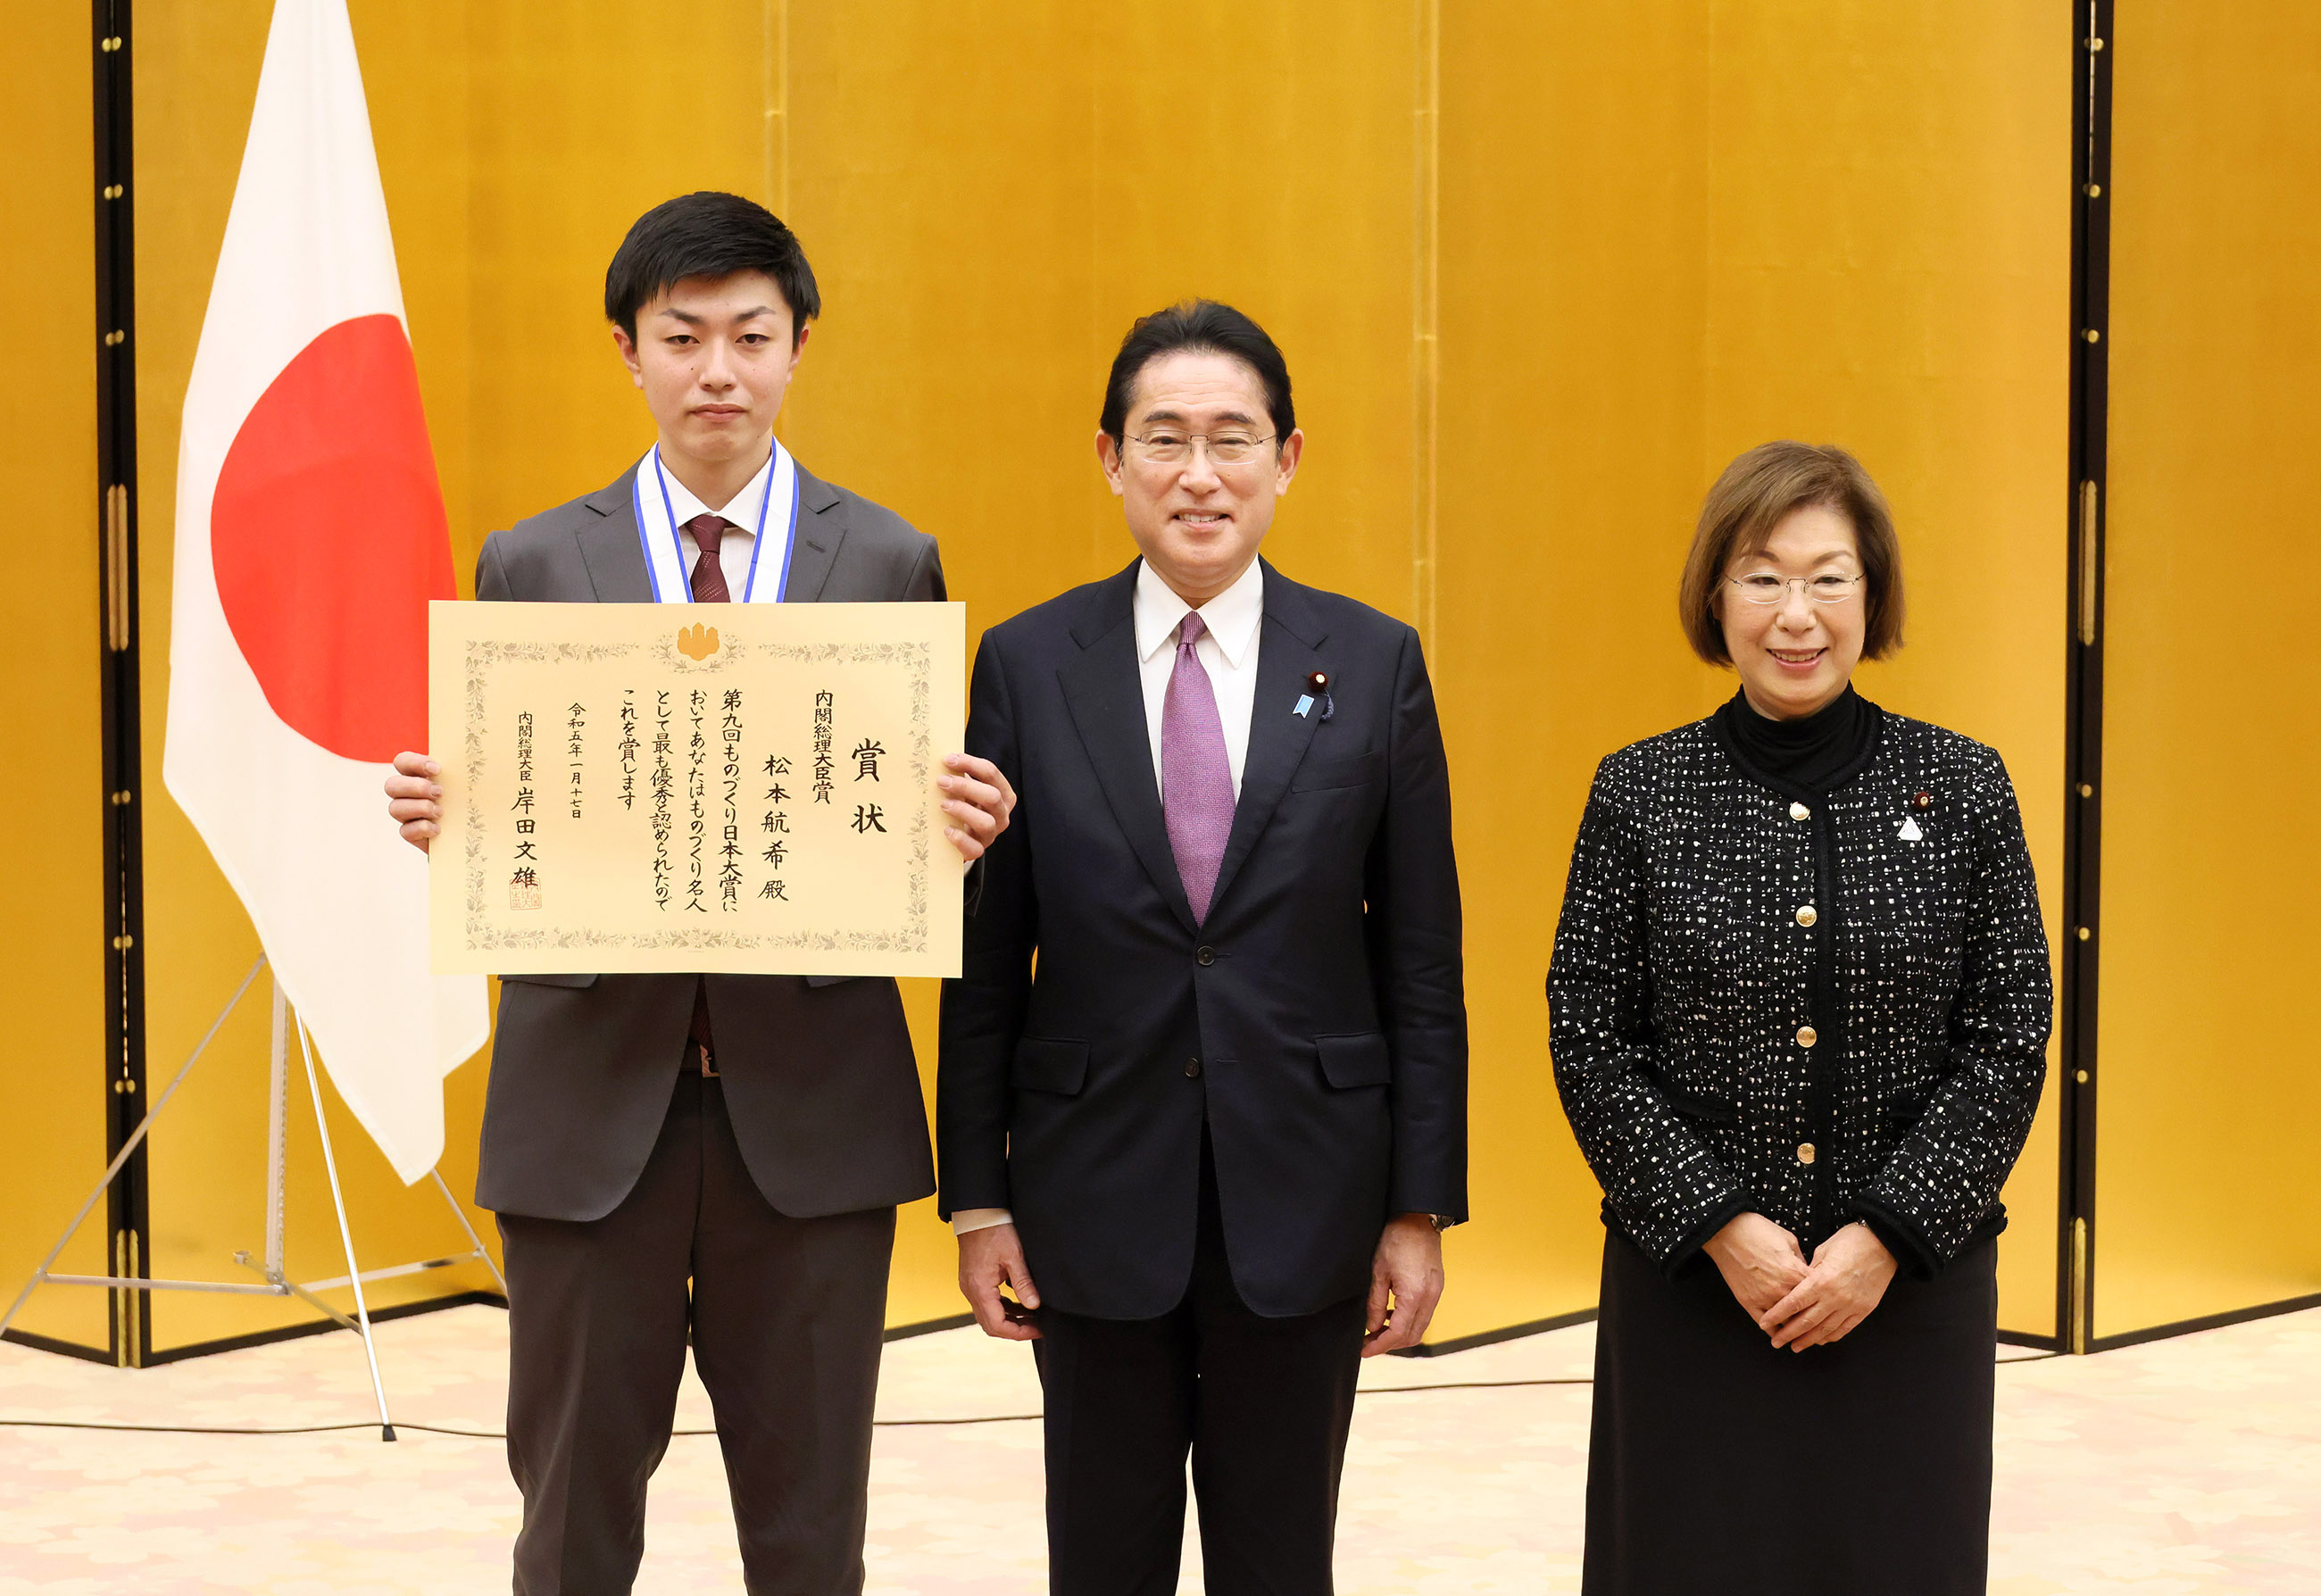 Commemorative photo session with award winners (8)